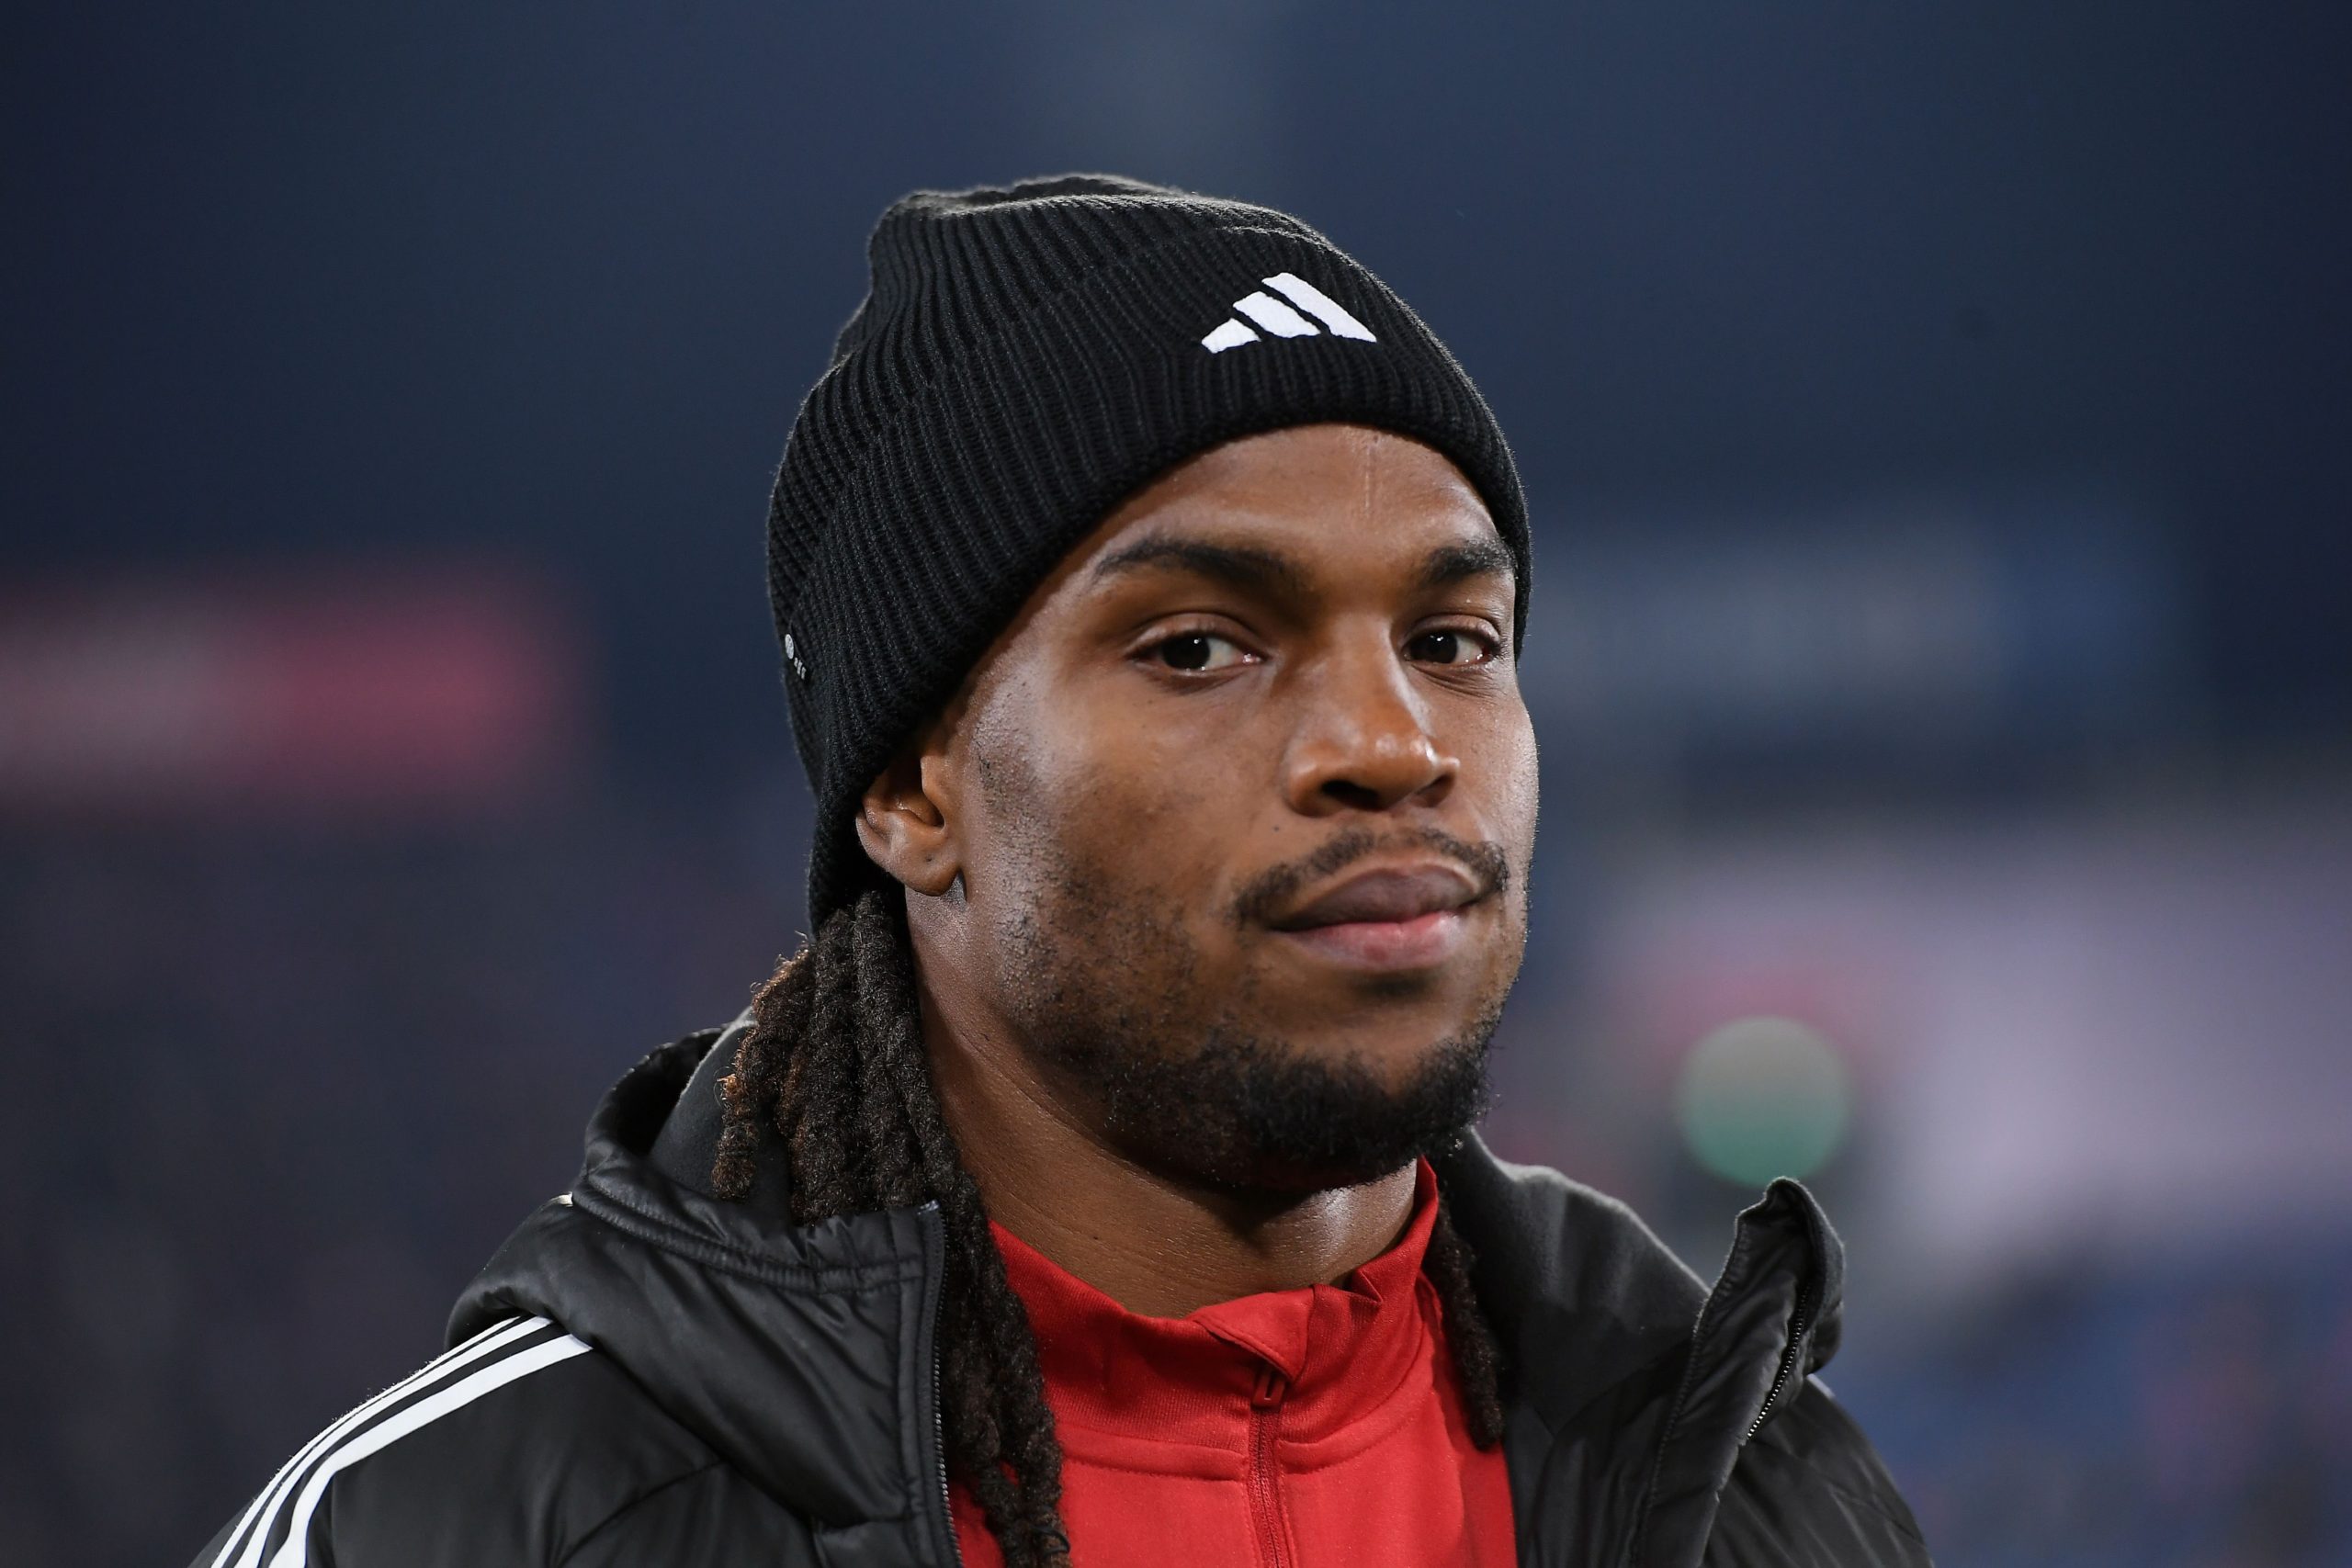 Roma are in talks with PSG to terminate the loan spell of Renato Sanches early. His stay has been hampered by thigh injuries.